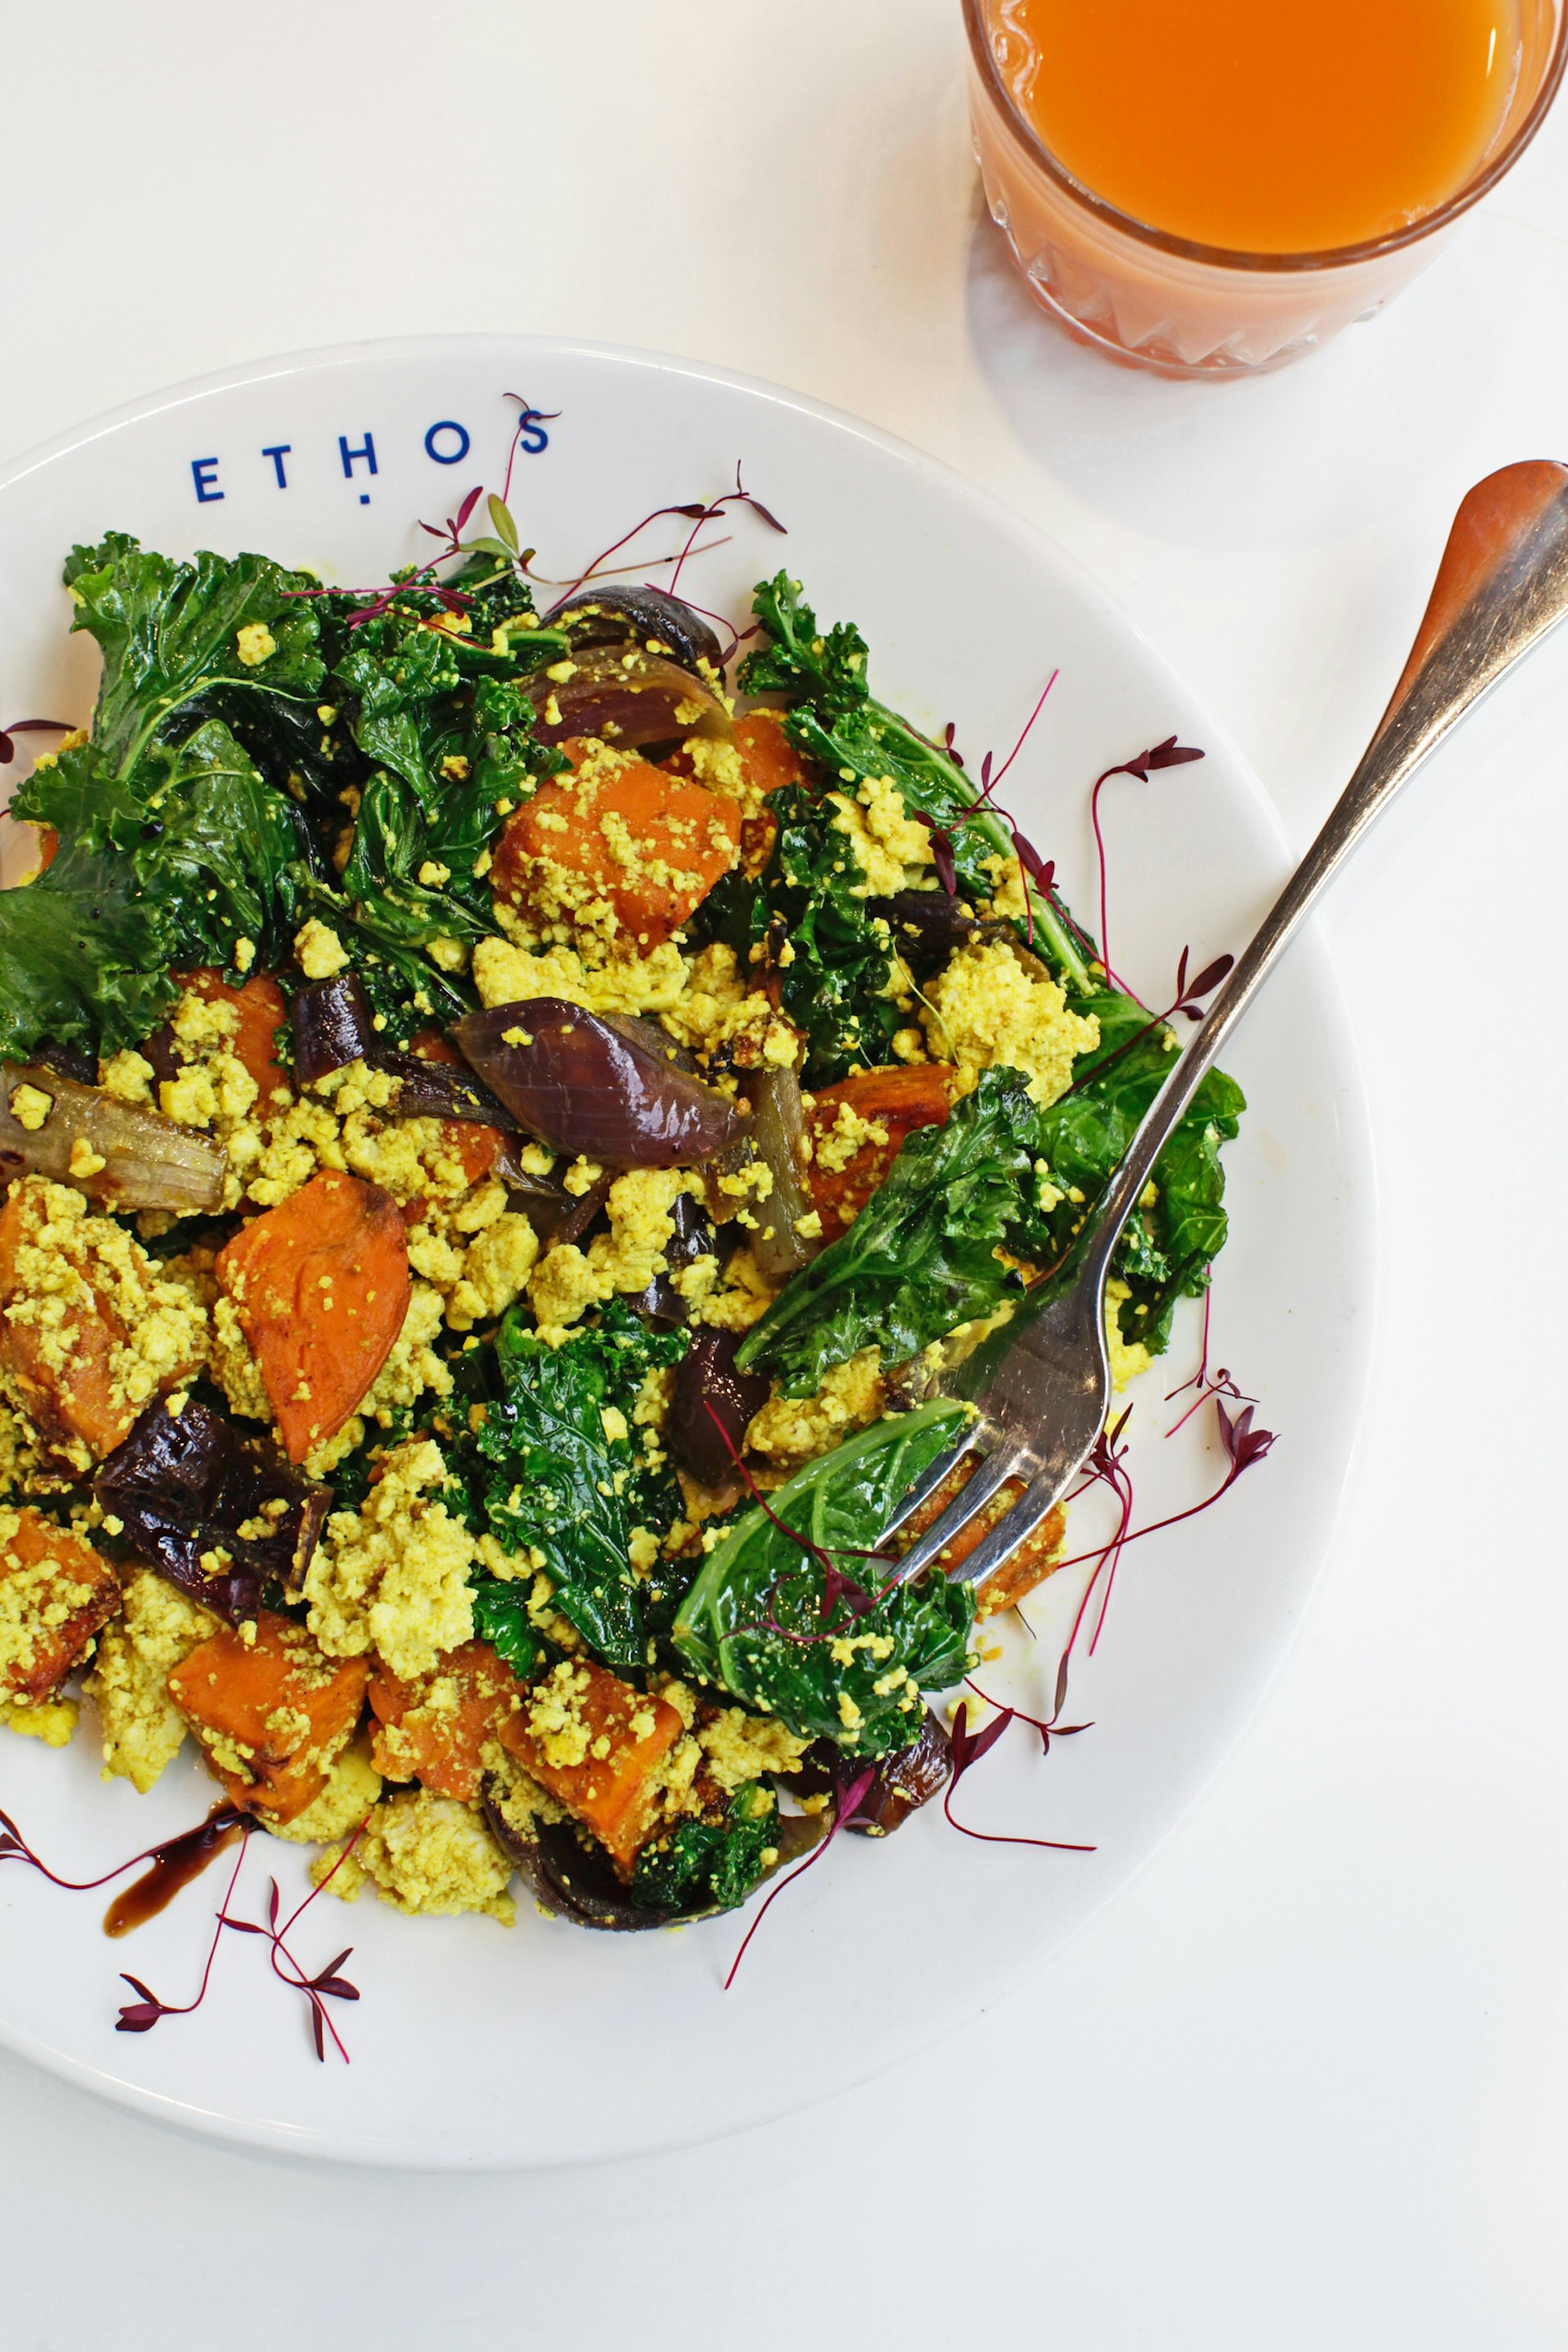 Hungry Londoners now have plenty of healthy options © Ethos Foods